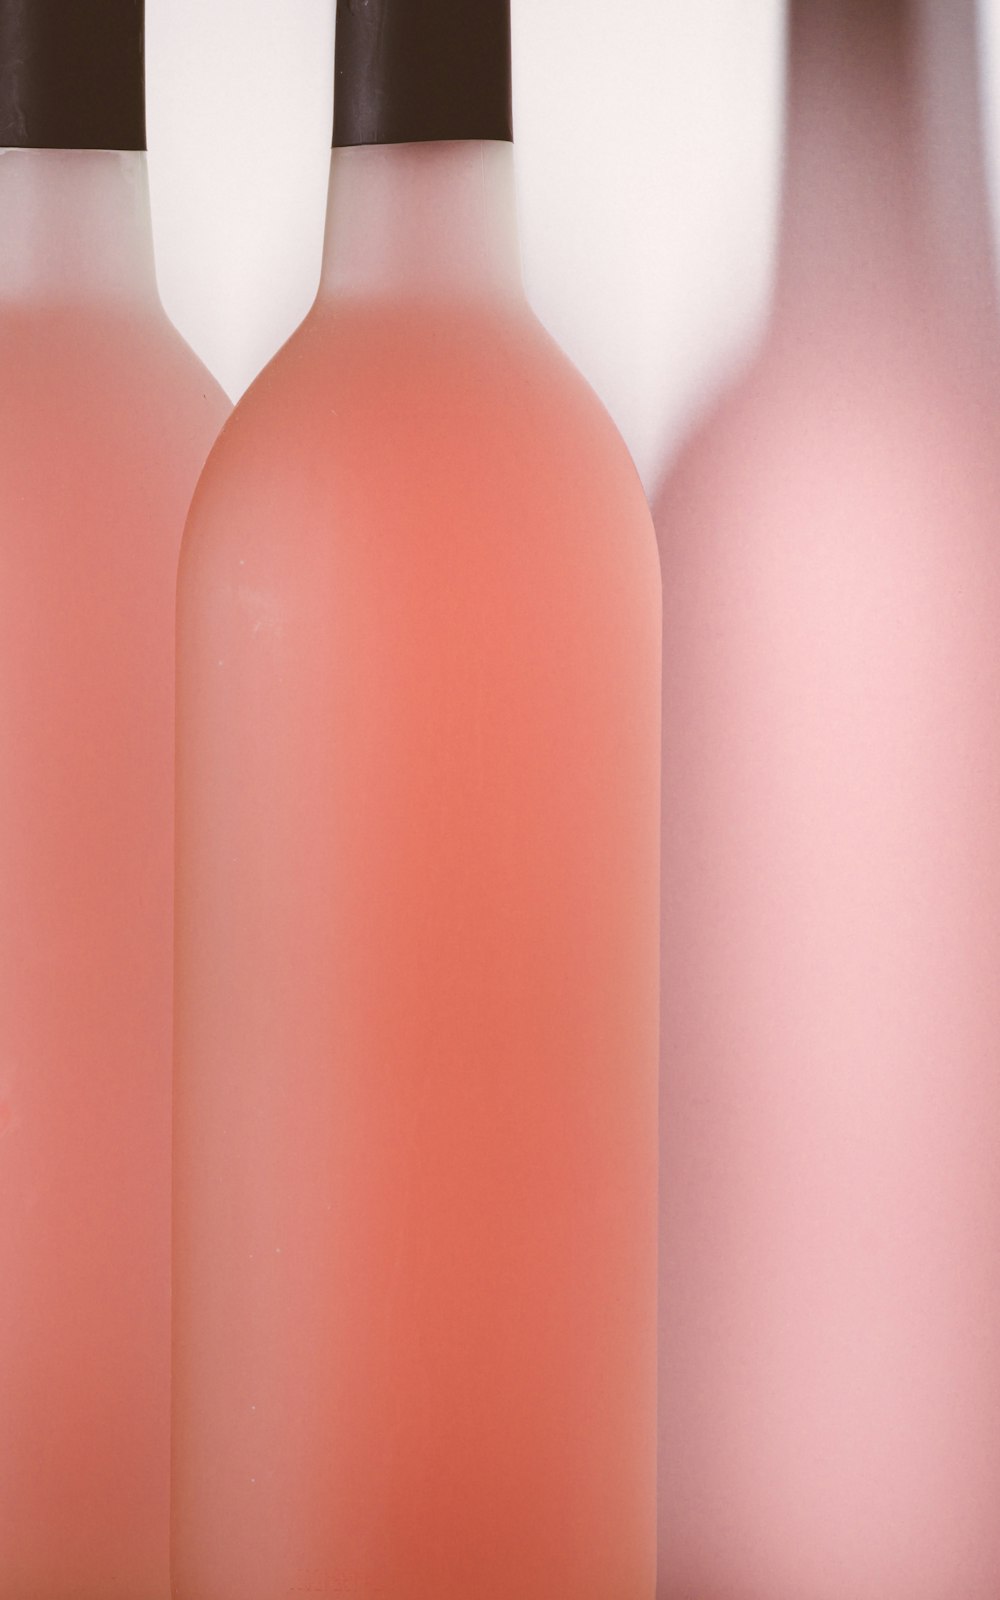 pink and white plastic bottles